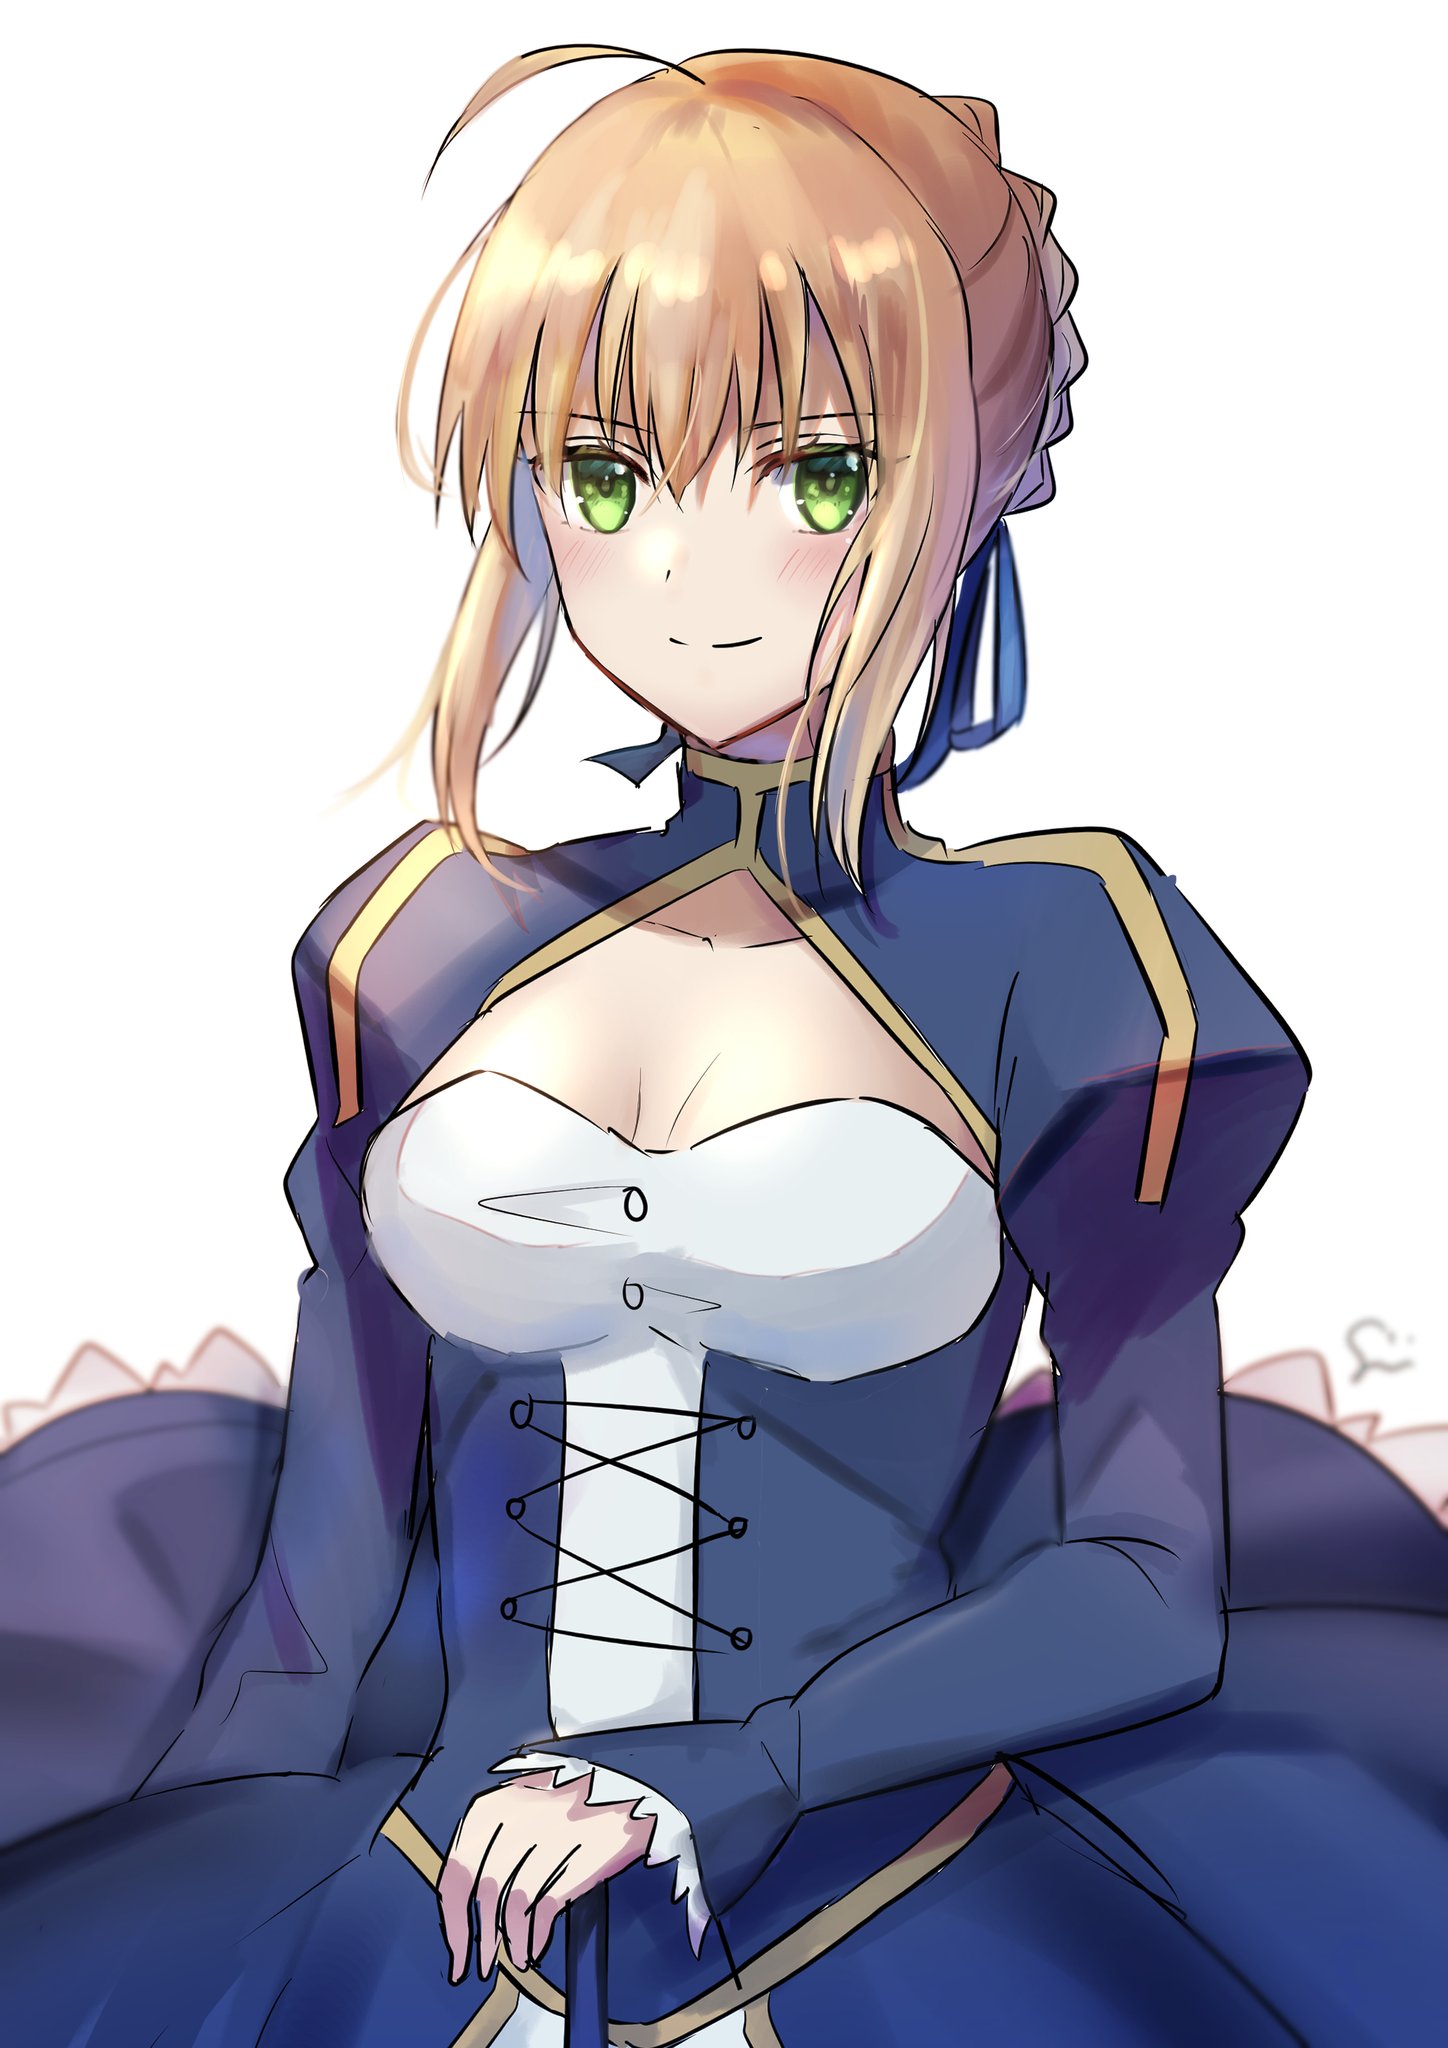 long hair, blonde, anime, anime girls, Fate series, Fate/Stay Night ...